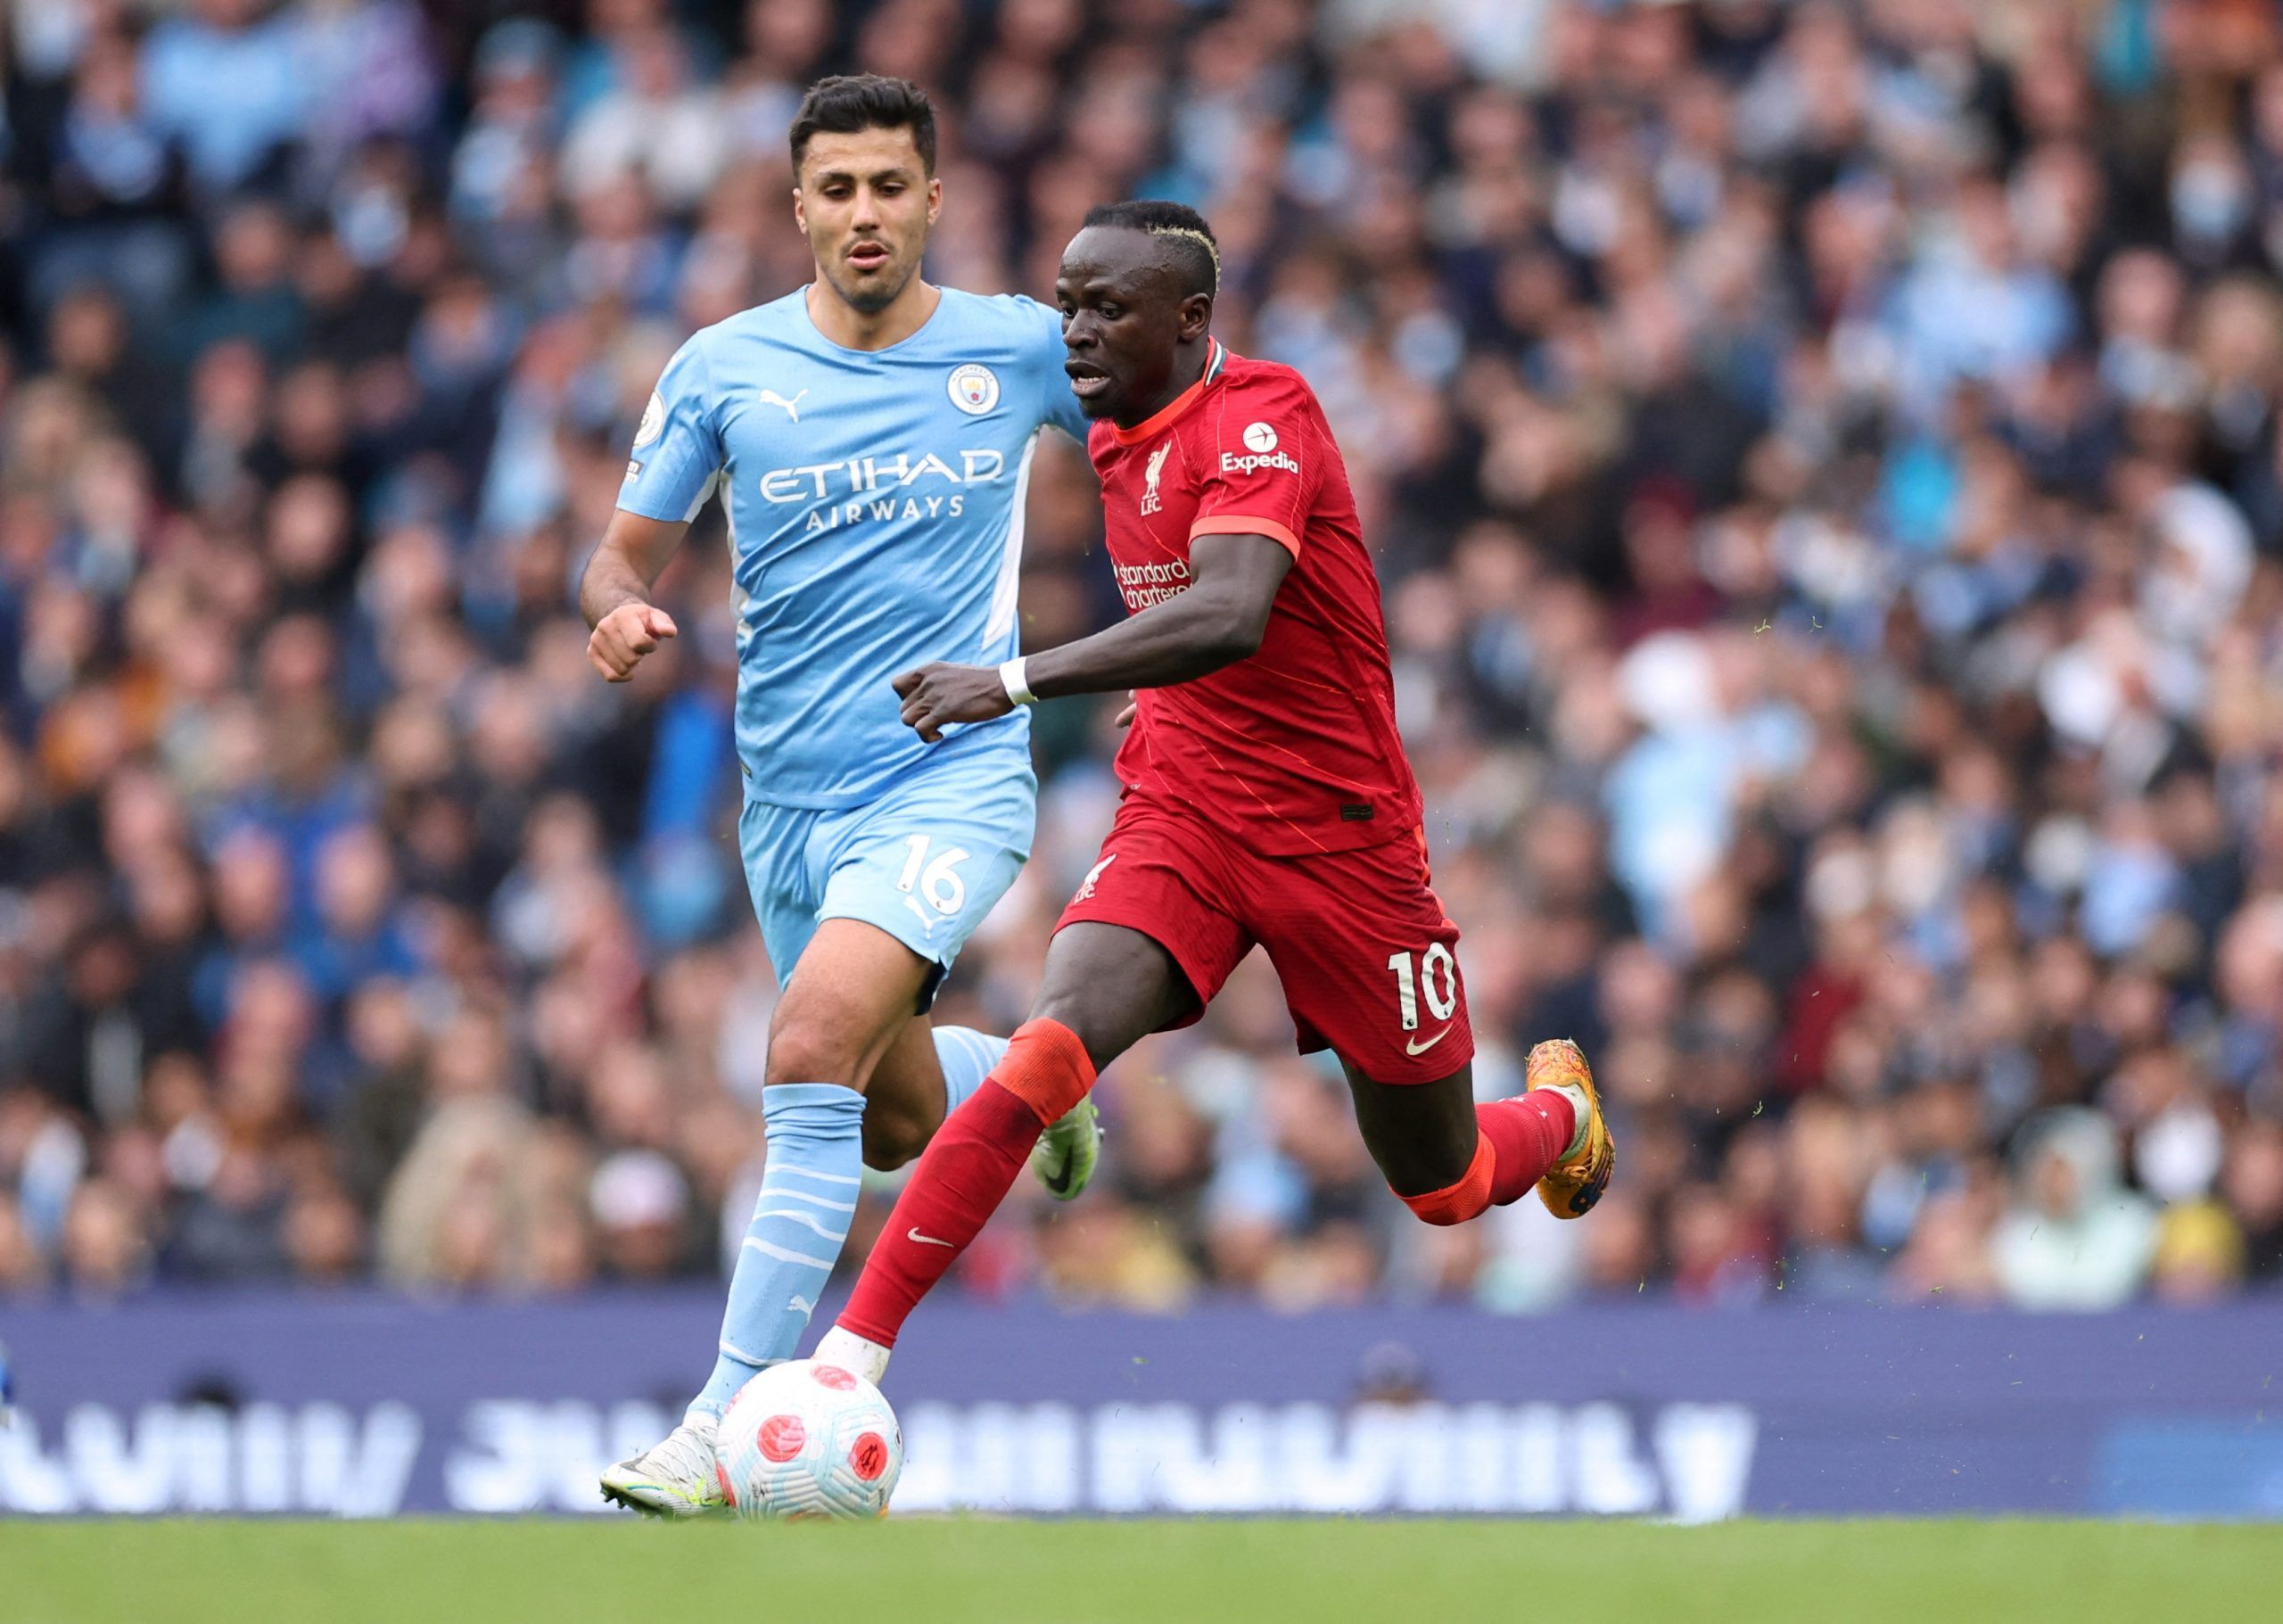 Soccer Football - Premier League - Manchester City v Liverpool - Etihad Stadium, Manchester, Britain - April 10, 2022 Liverpool's Sadio Mane in action with Manchester City's Rodri Action Images via Reuters/Carl Recine EDITORIAL USE ONLY. No use with unauthorized audio, video, data, fixture lists, club/league logos or 'live' services. Online in-match use limited to 75 images, no video emulation. No use in betting, games or single club /league/player publications.  Please contact your account repr